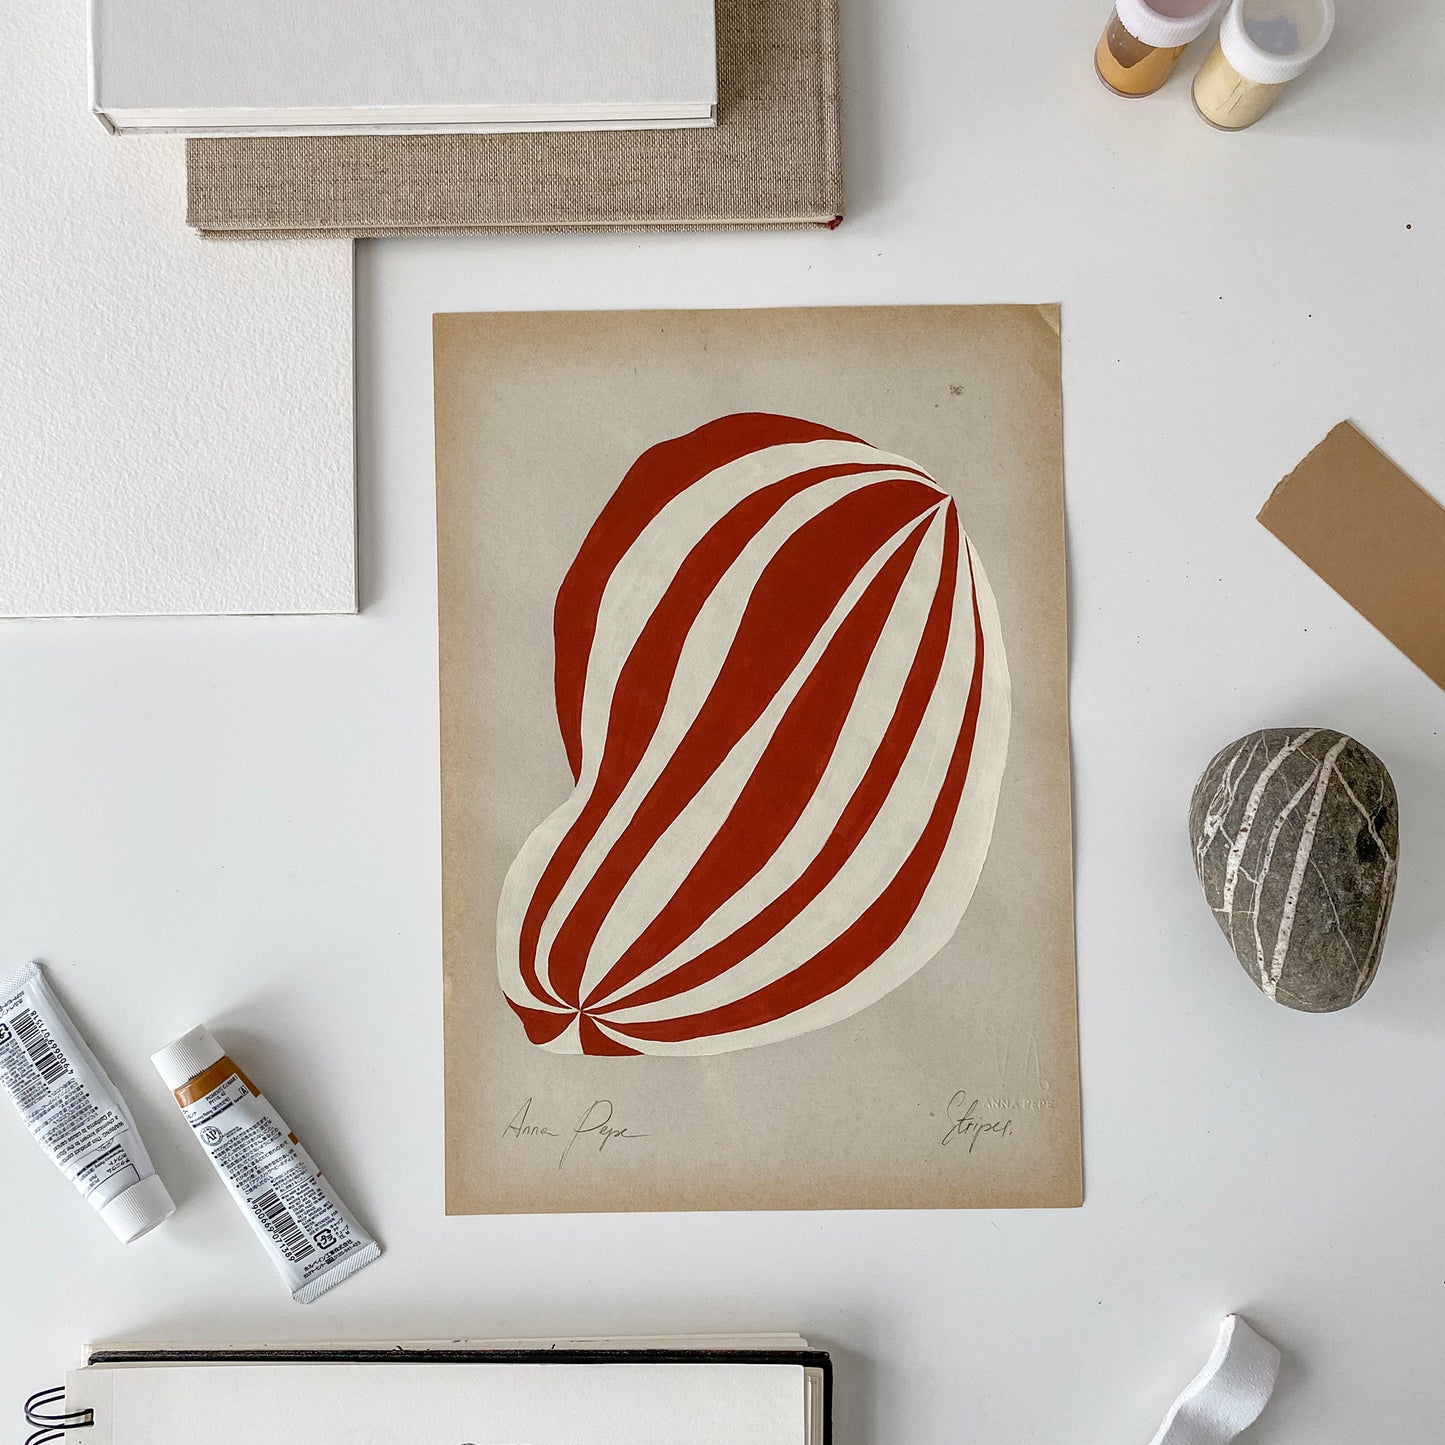 Stripes. 01 - Gouache painting on vintage paper Anna Pepe forn Studio